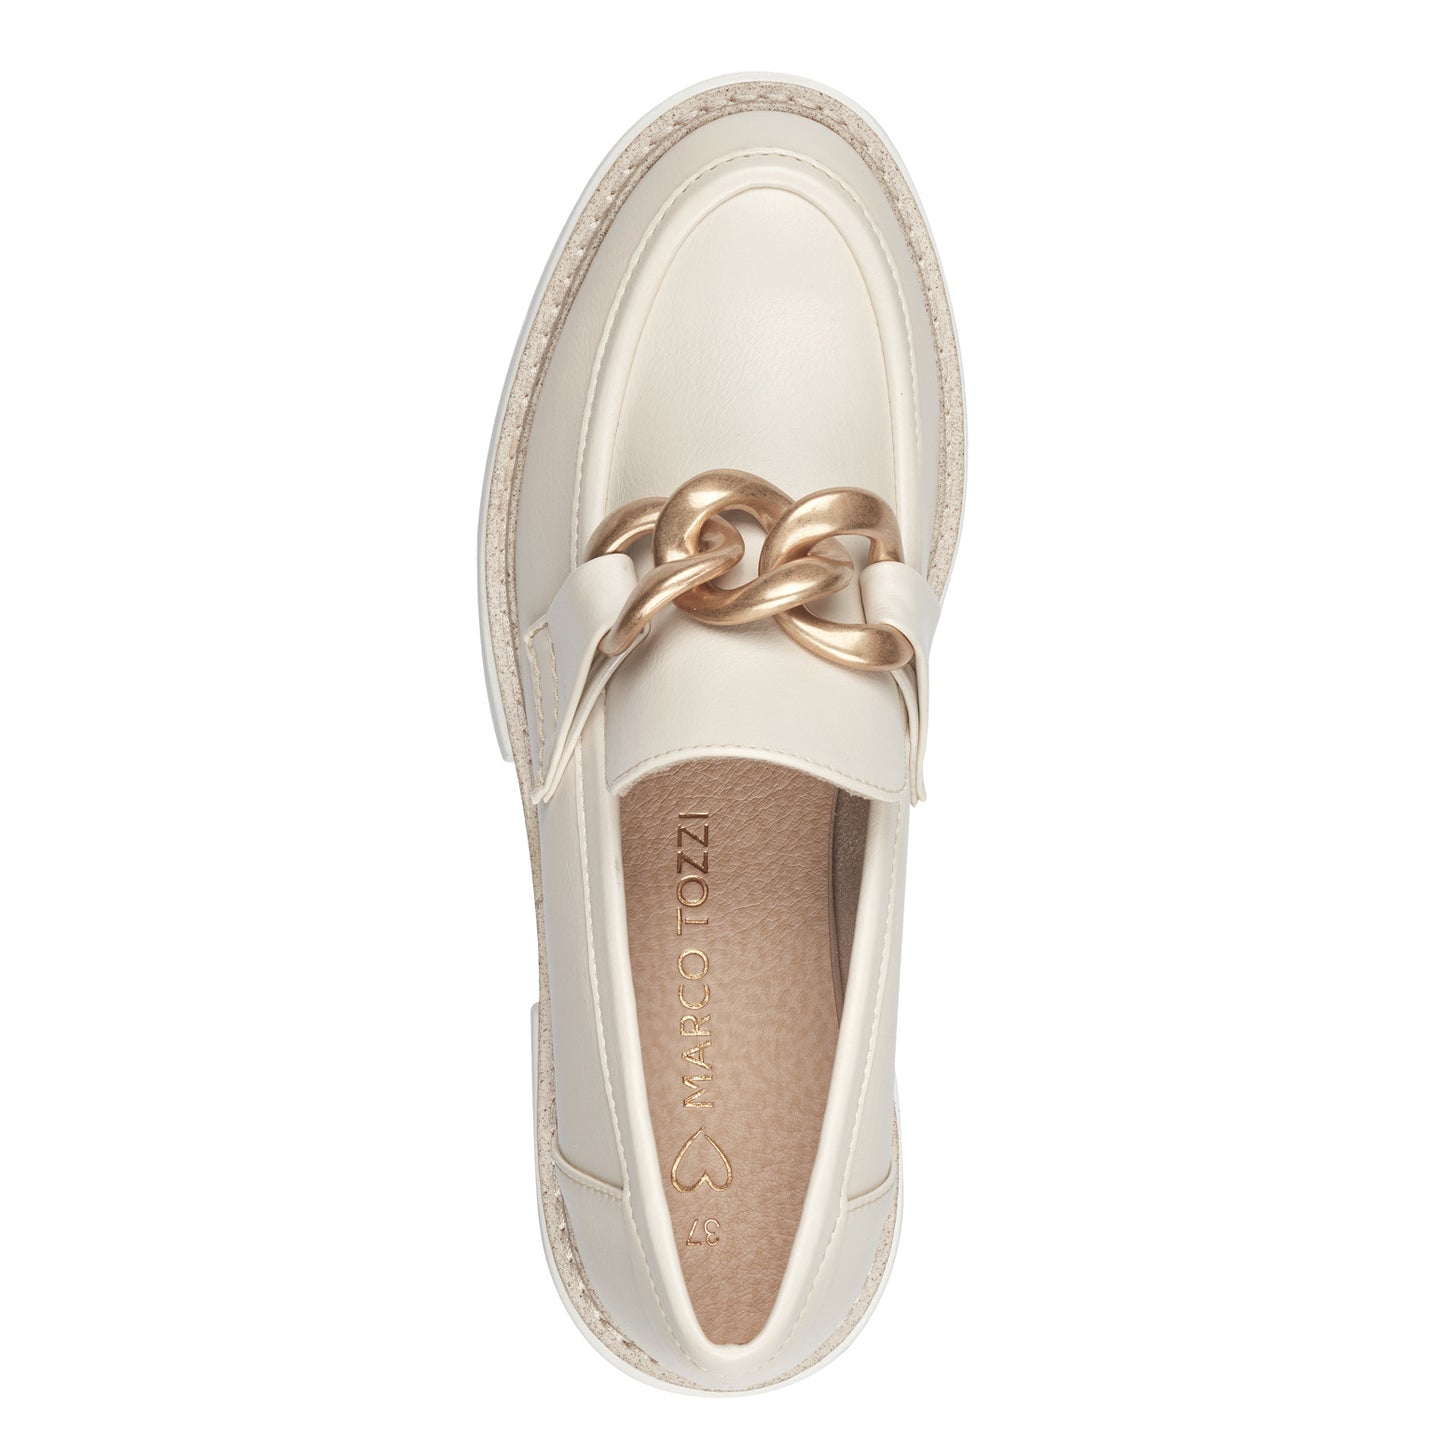 Marco Tozzi - Ladies Shoes Loafers Cream & Gold (1862)